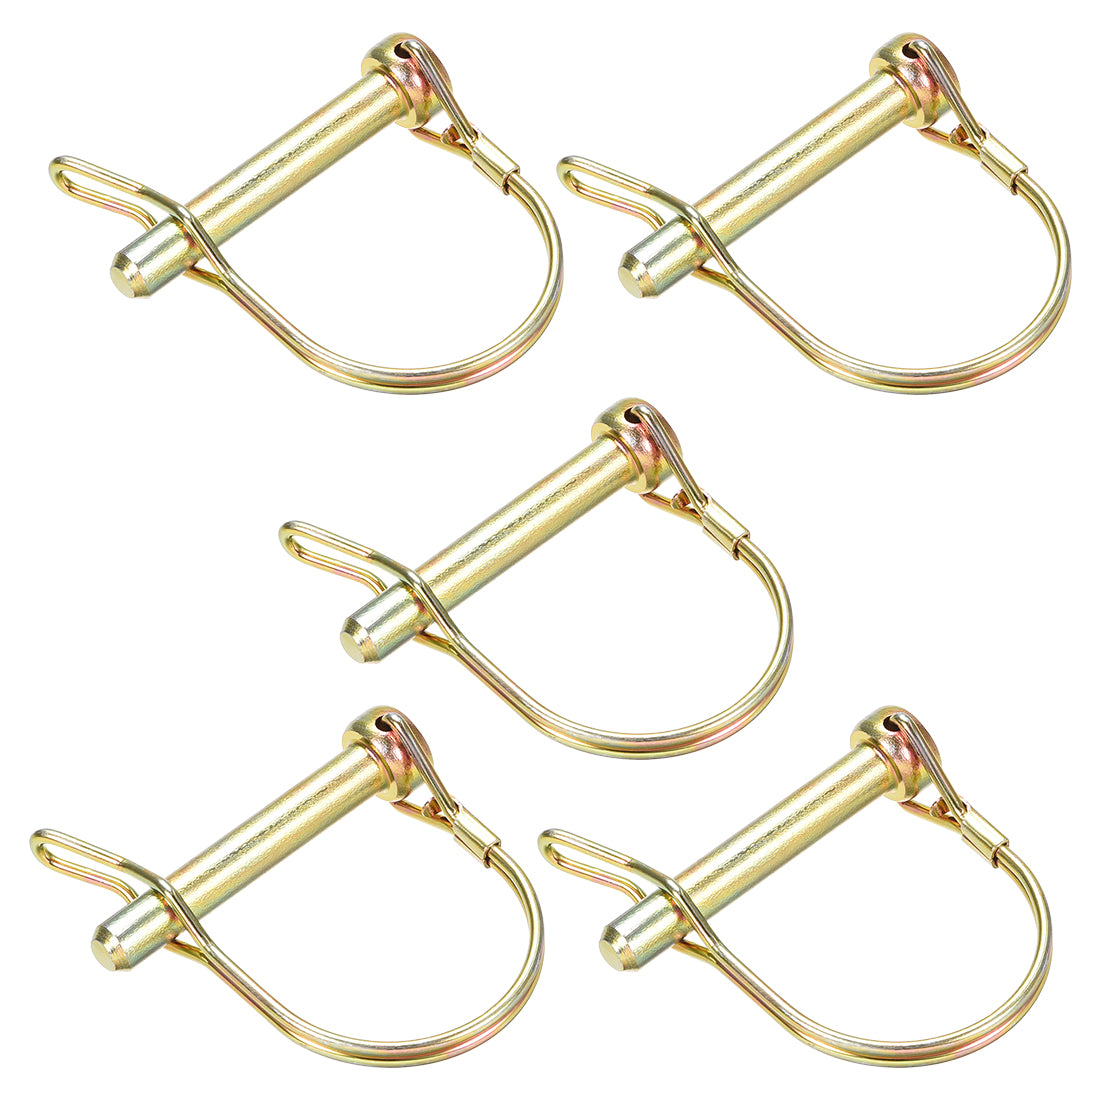 uxcell Uxcell Shaft Locking Pin w Ear 8mmx50mm Coupler Pin for Farm Trailers Lawn Arch 5Pcs